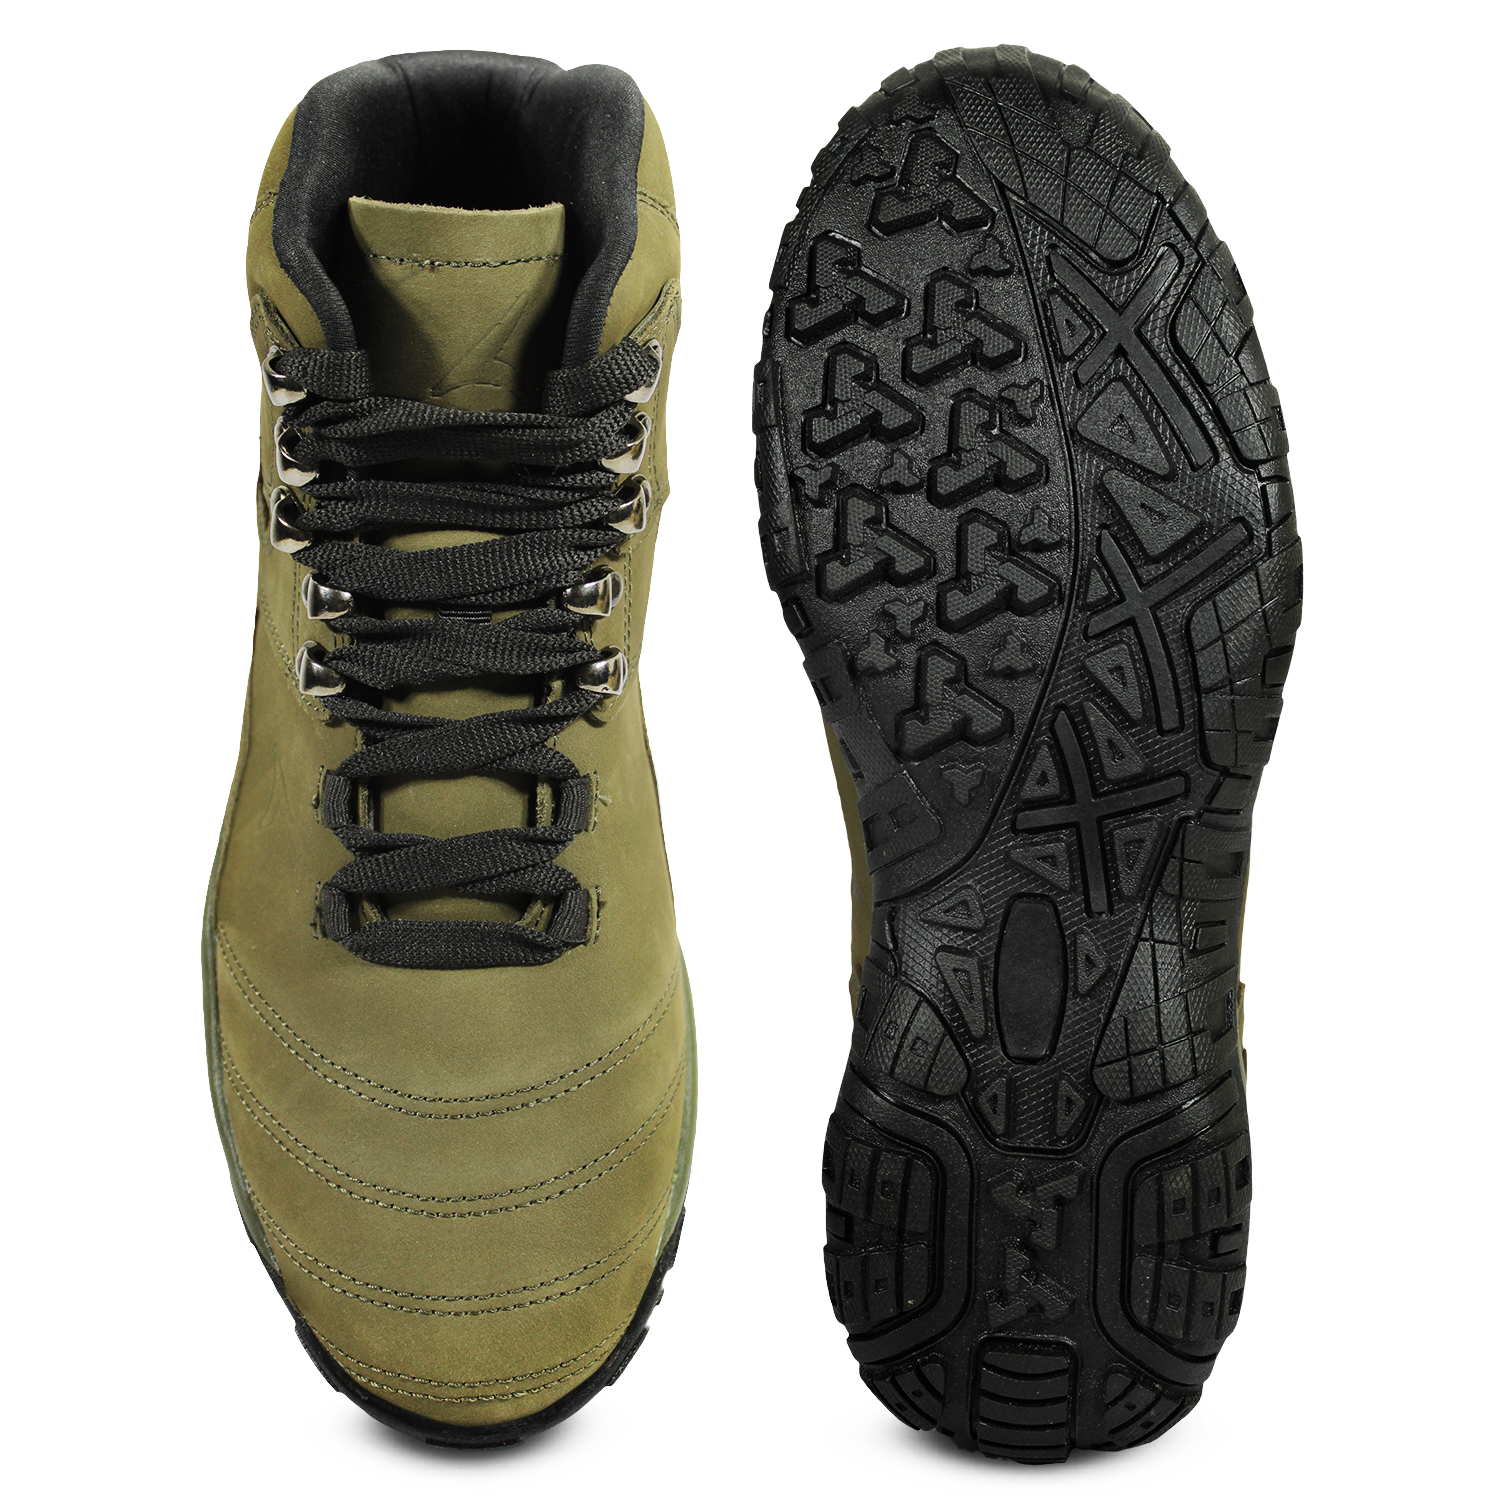 Tracer Shoes | Olive | Men's Collection